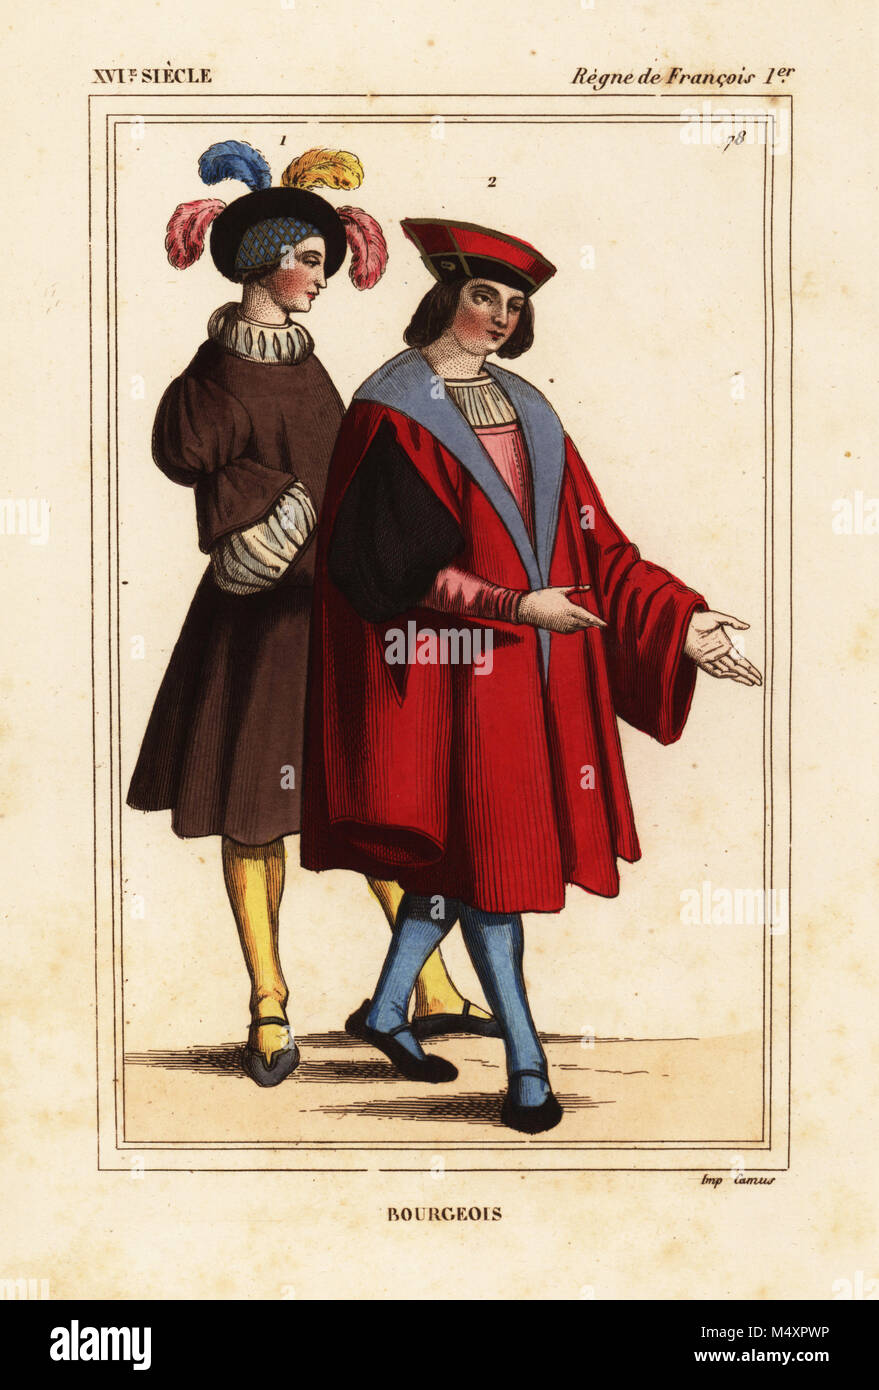 Fashions of bourgeois men of Paris, reign of King Francis I of France. Handcoloured lithograph after a miniature in a manuscript in the Bibliotheque Nationale (Nicolas Xavier Willemin II 191) from Le Bibliophile Jacob aka Paul Lacroix's Costumes Historiques de la France (Historical Costumes of France), Administration de Librairie, Paris, 1852. Stock Photo